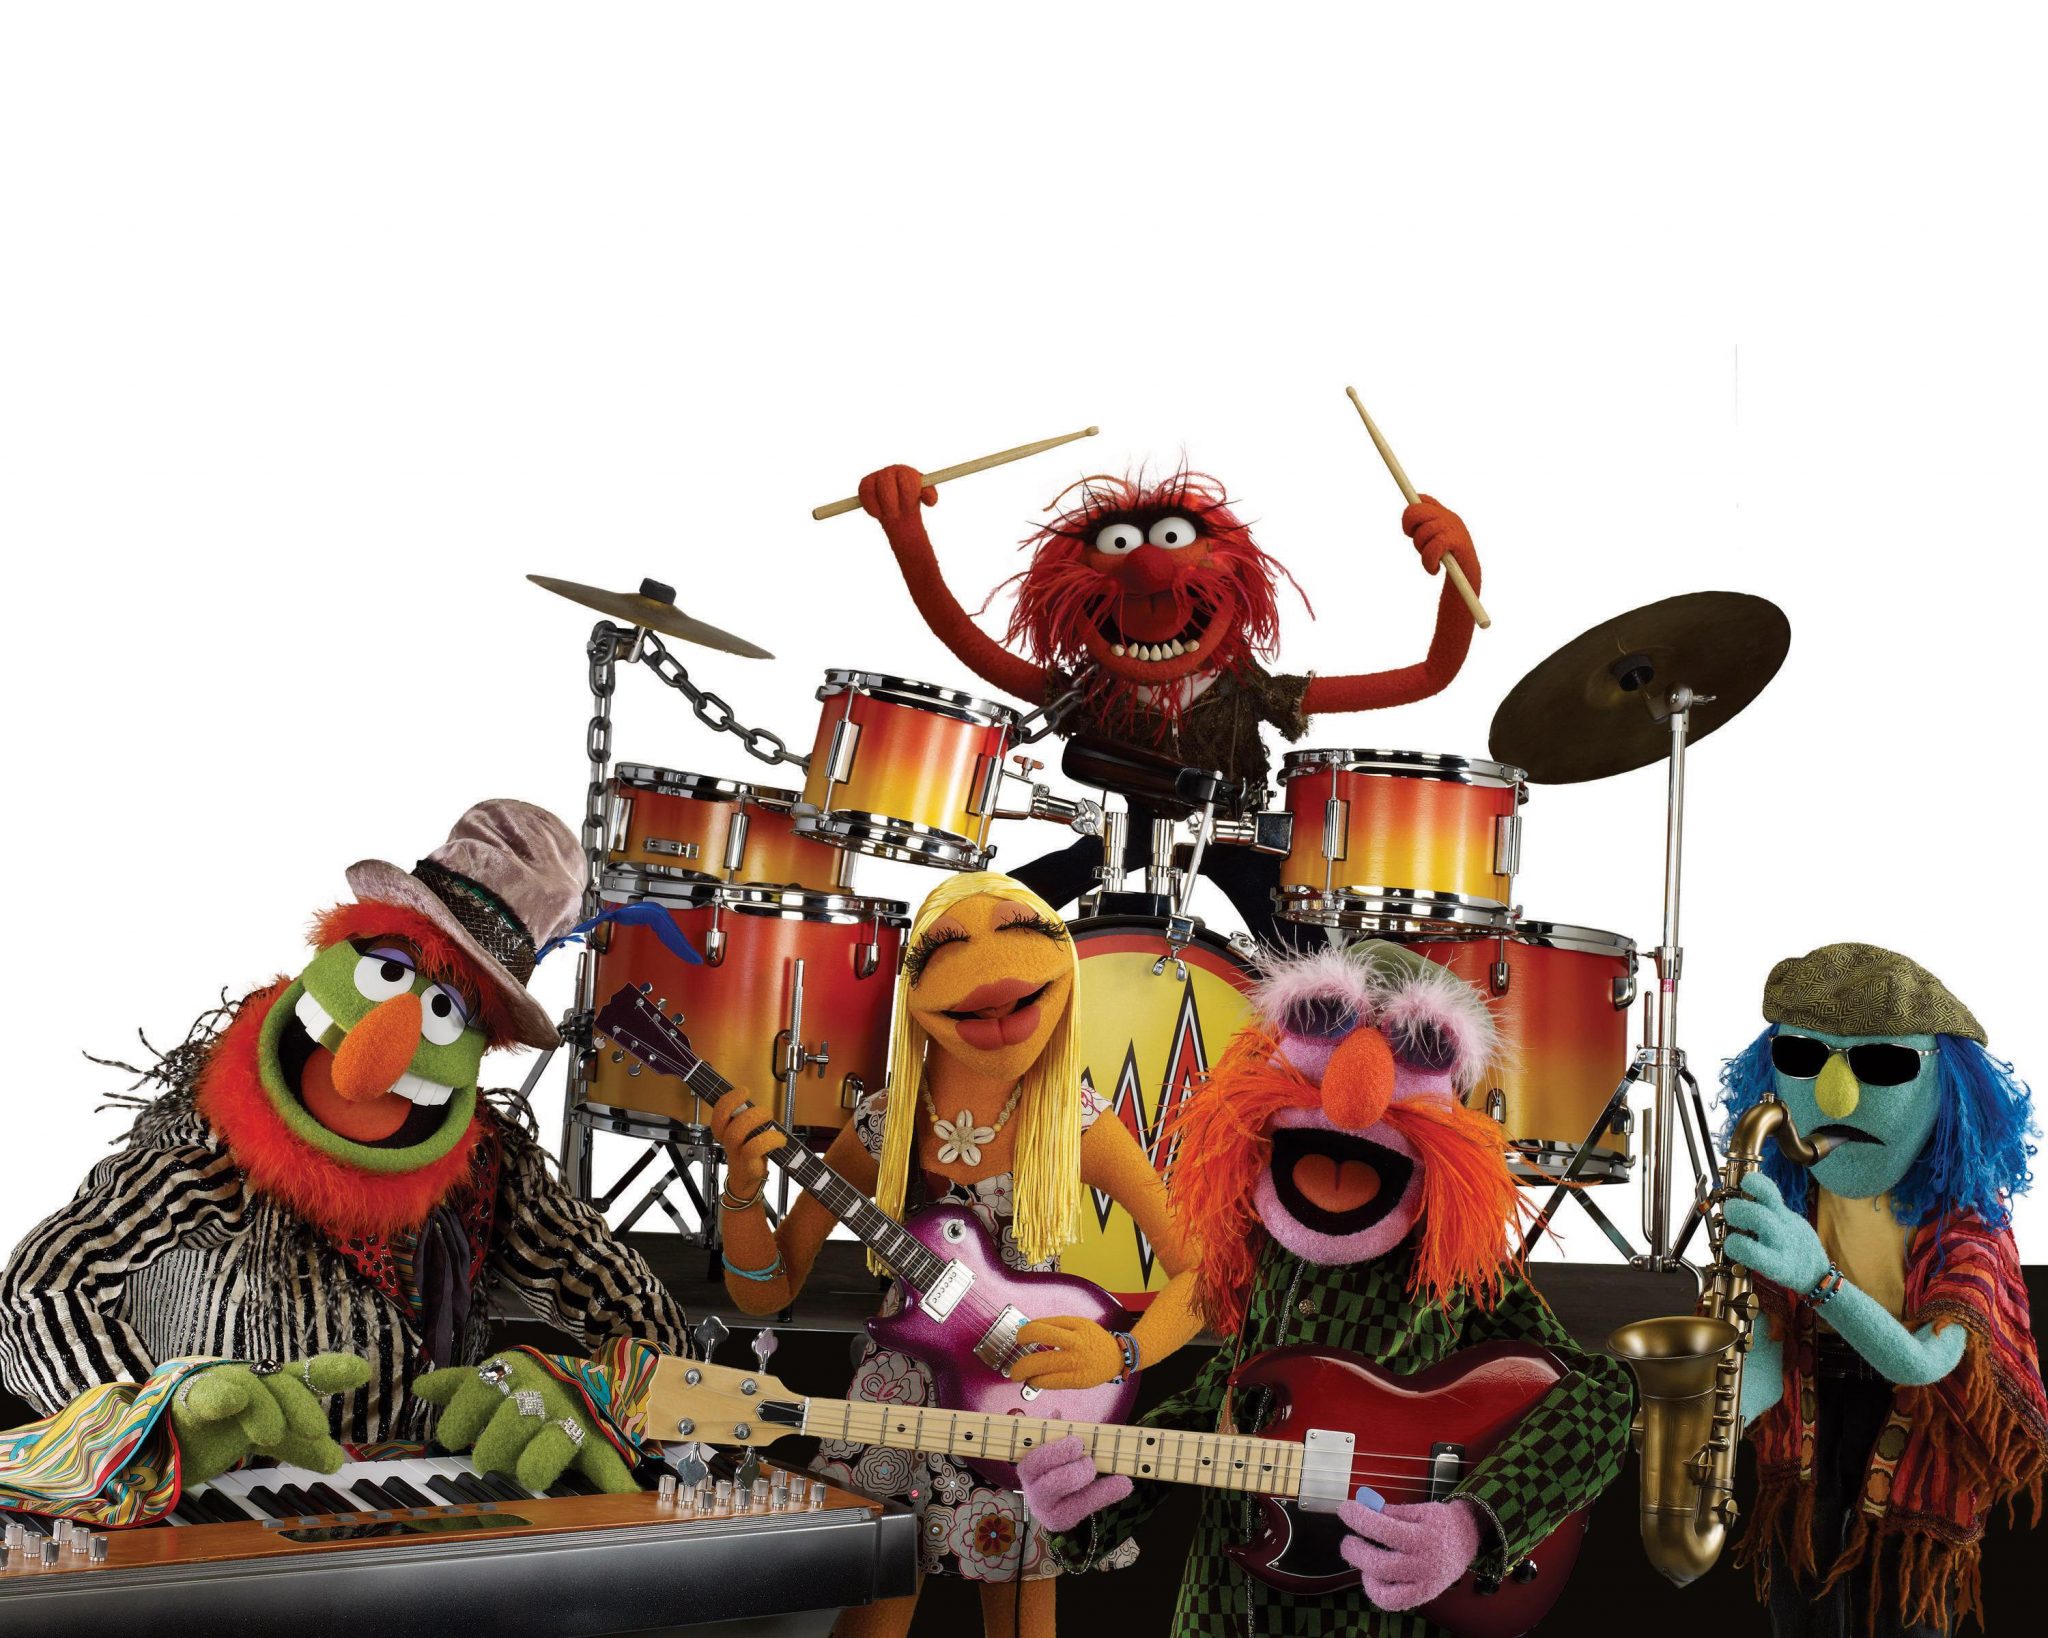 A picture of the muppets playing music in a band.